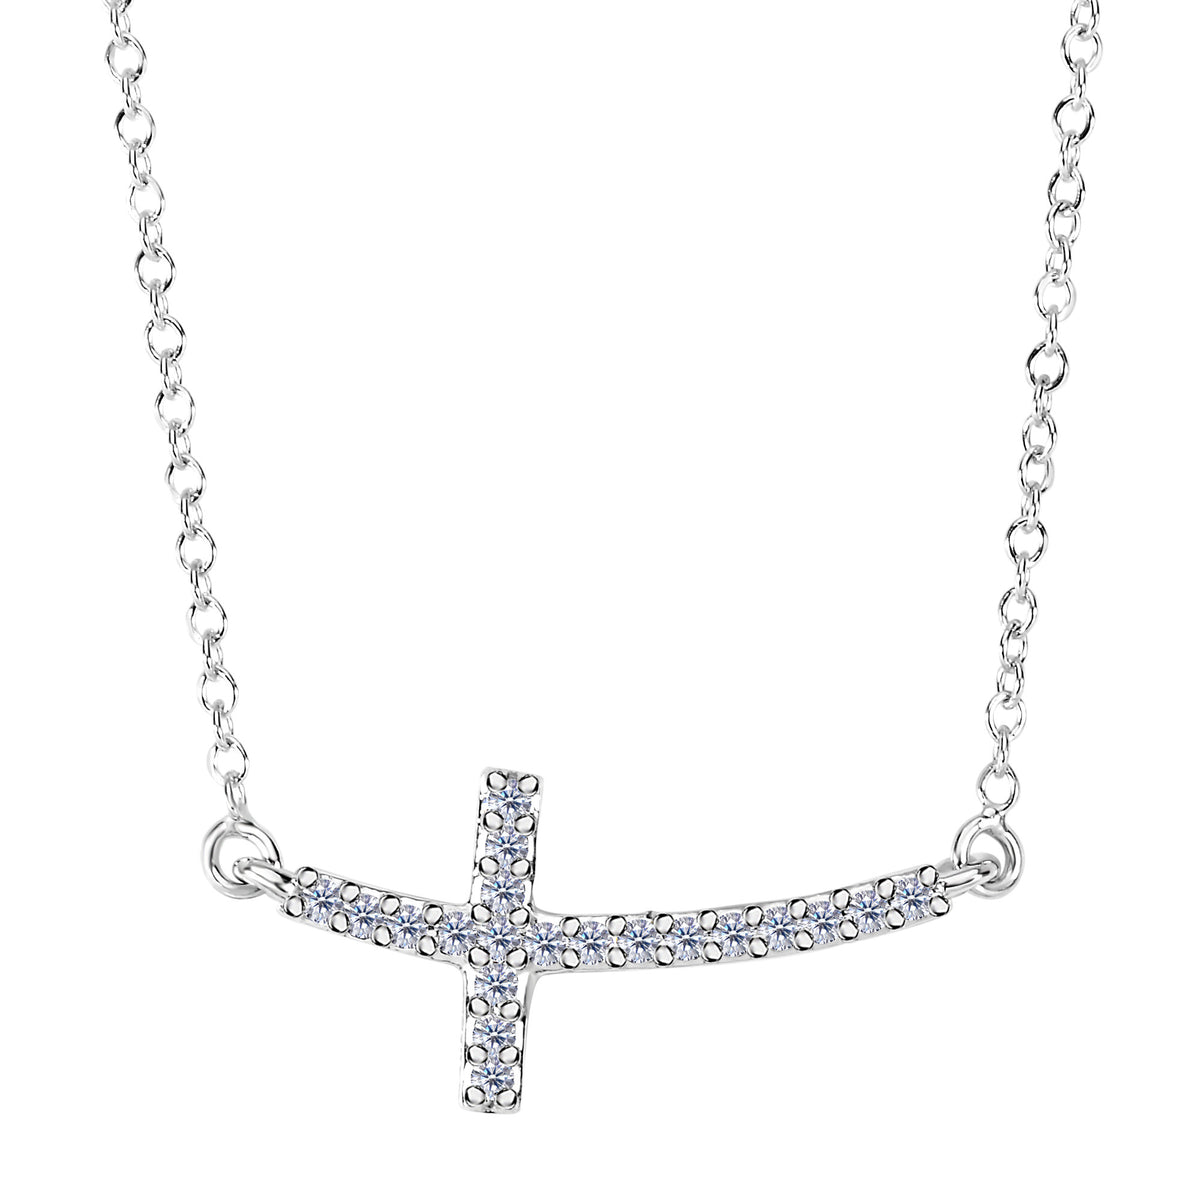 14k White Gold With 0.12ct Diamonds Curved Side Ways Cross Necklace - 18 Inches fine designer jewelry for men and women